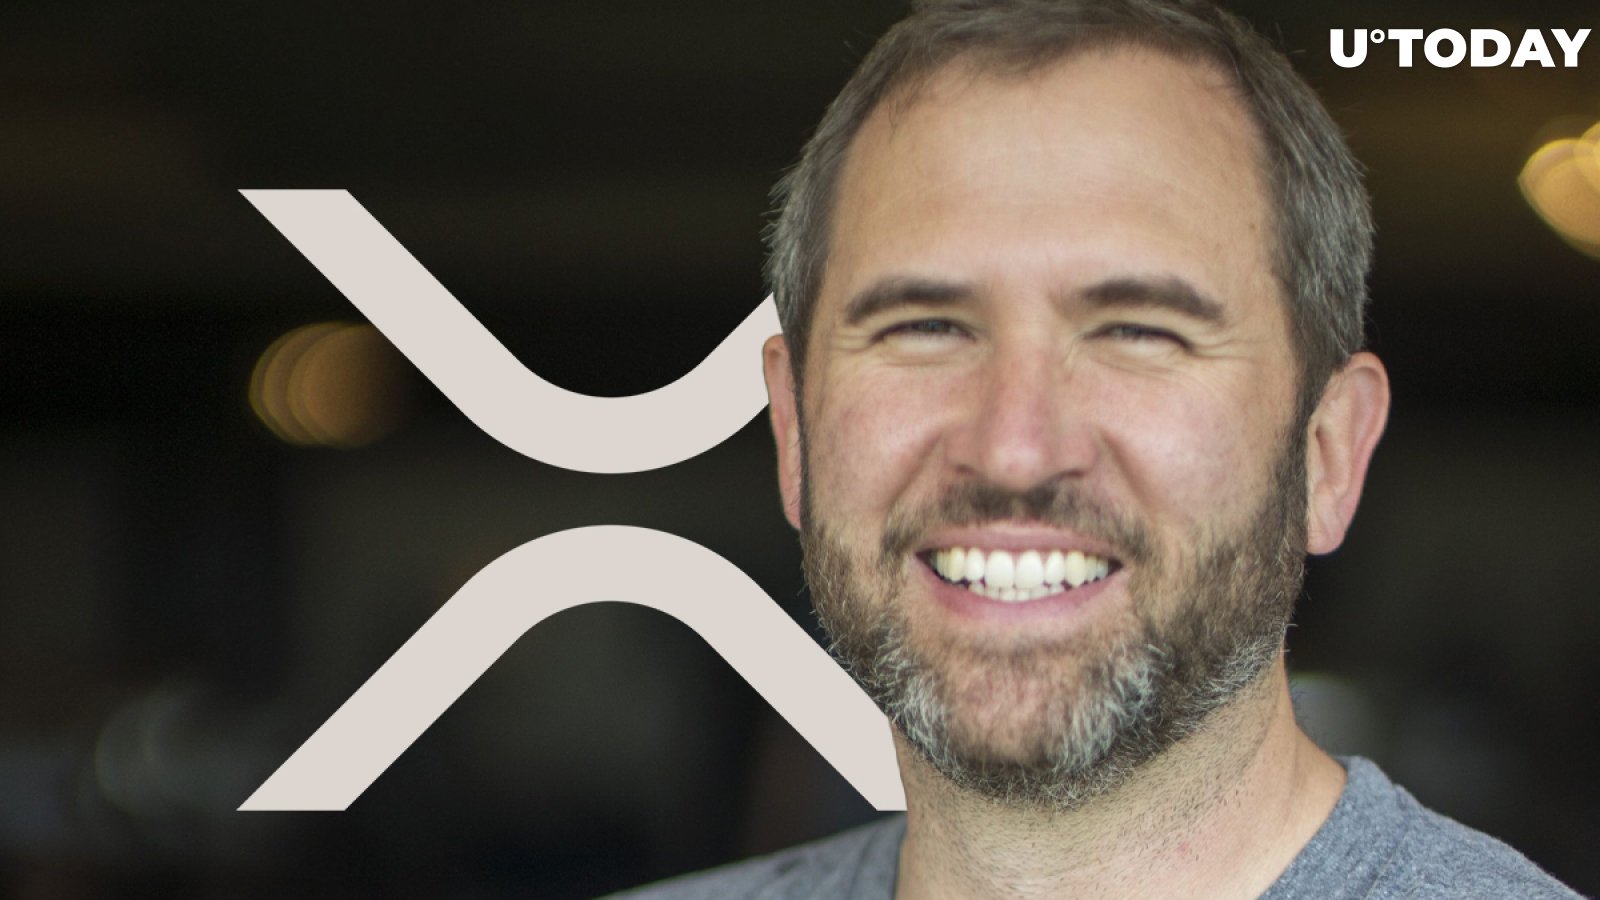 Ripple CEO Brad Garlinghouse: “So Do I Care About the Overall XRP Market? 100 Percent” 